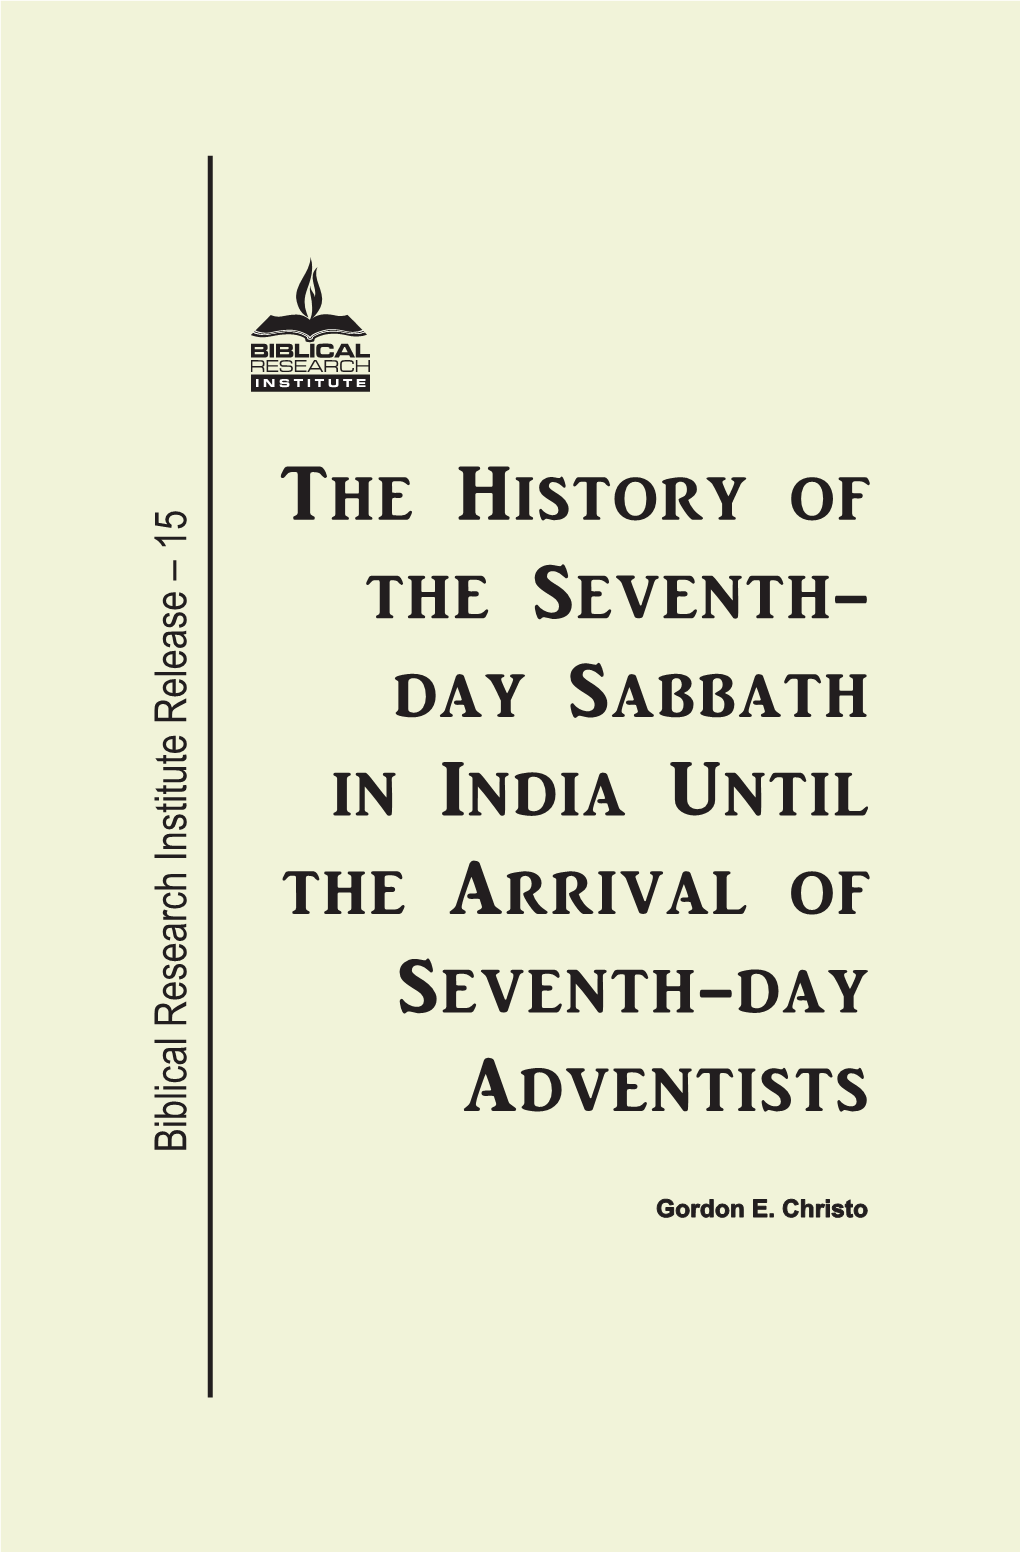 Day Sabbath in India Until the Arrival of Seventh-Day Adventists